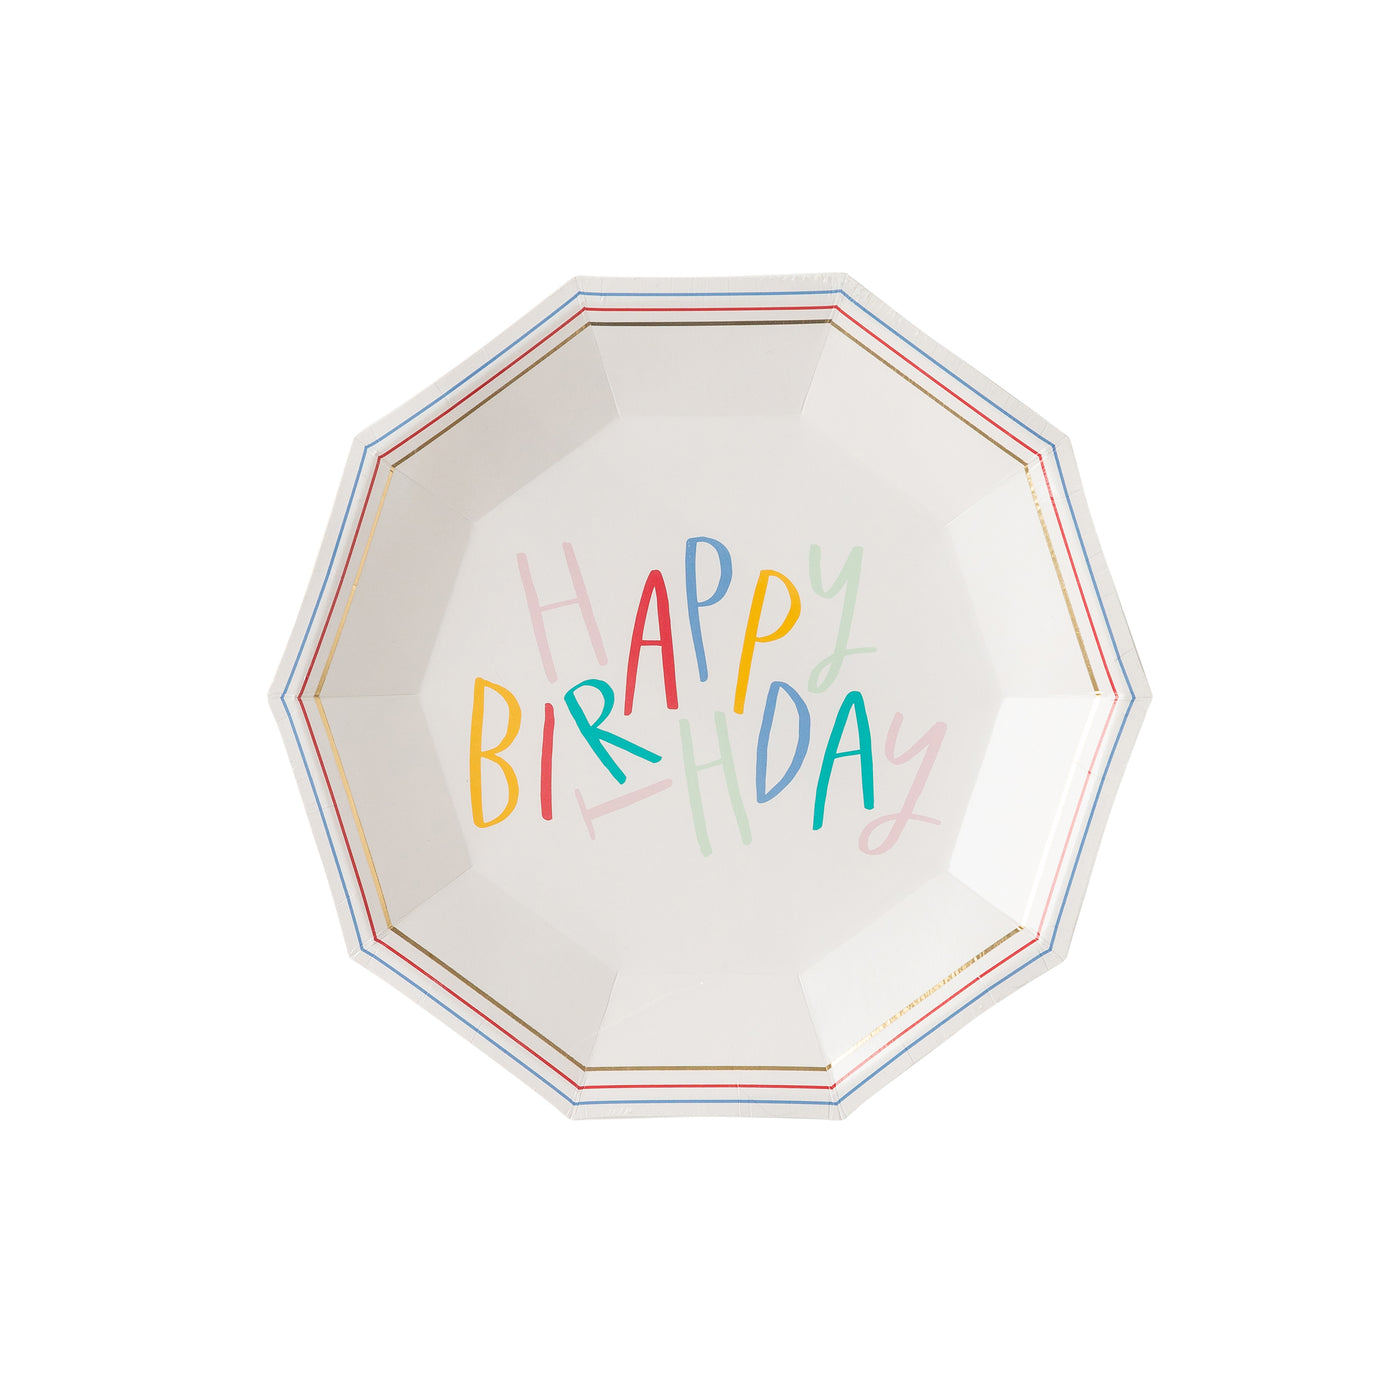 OPB840 - Oui Party Birthday Hexagon Paper Plate